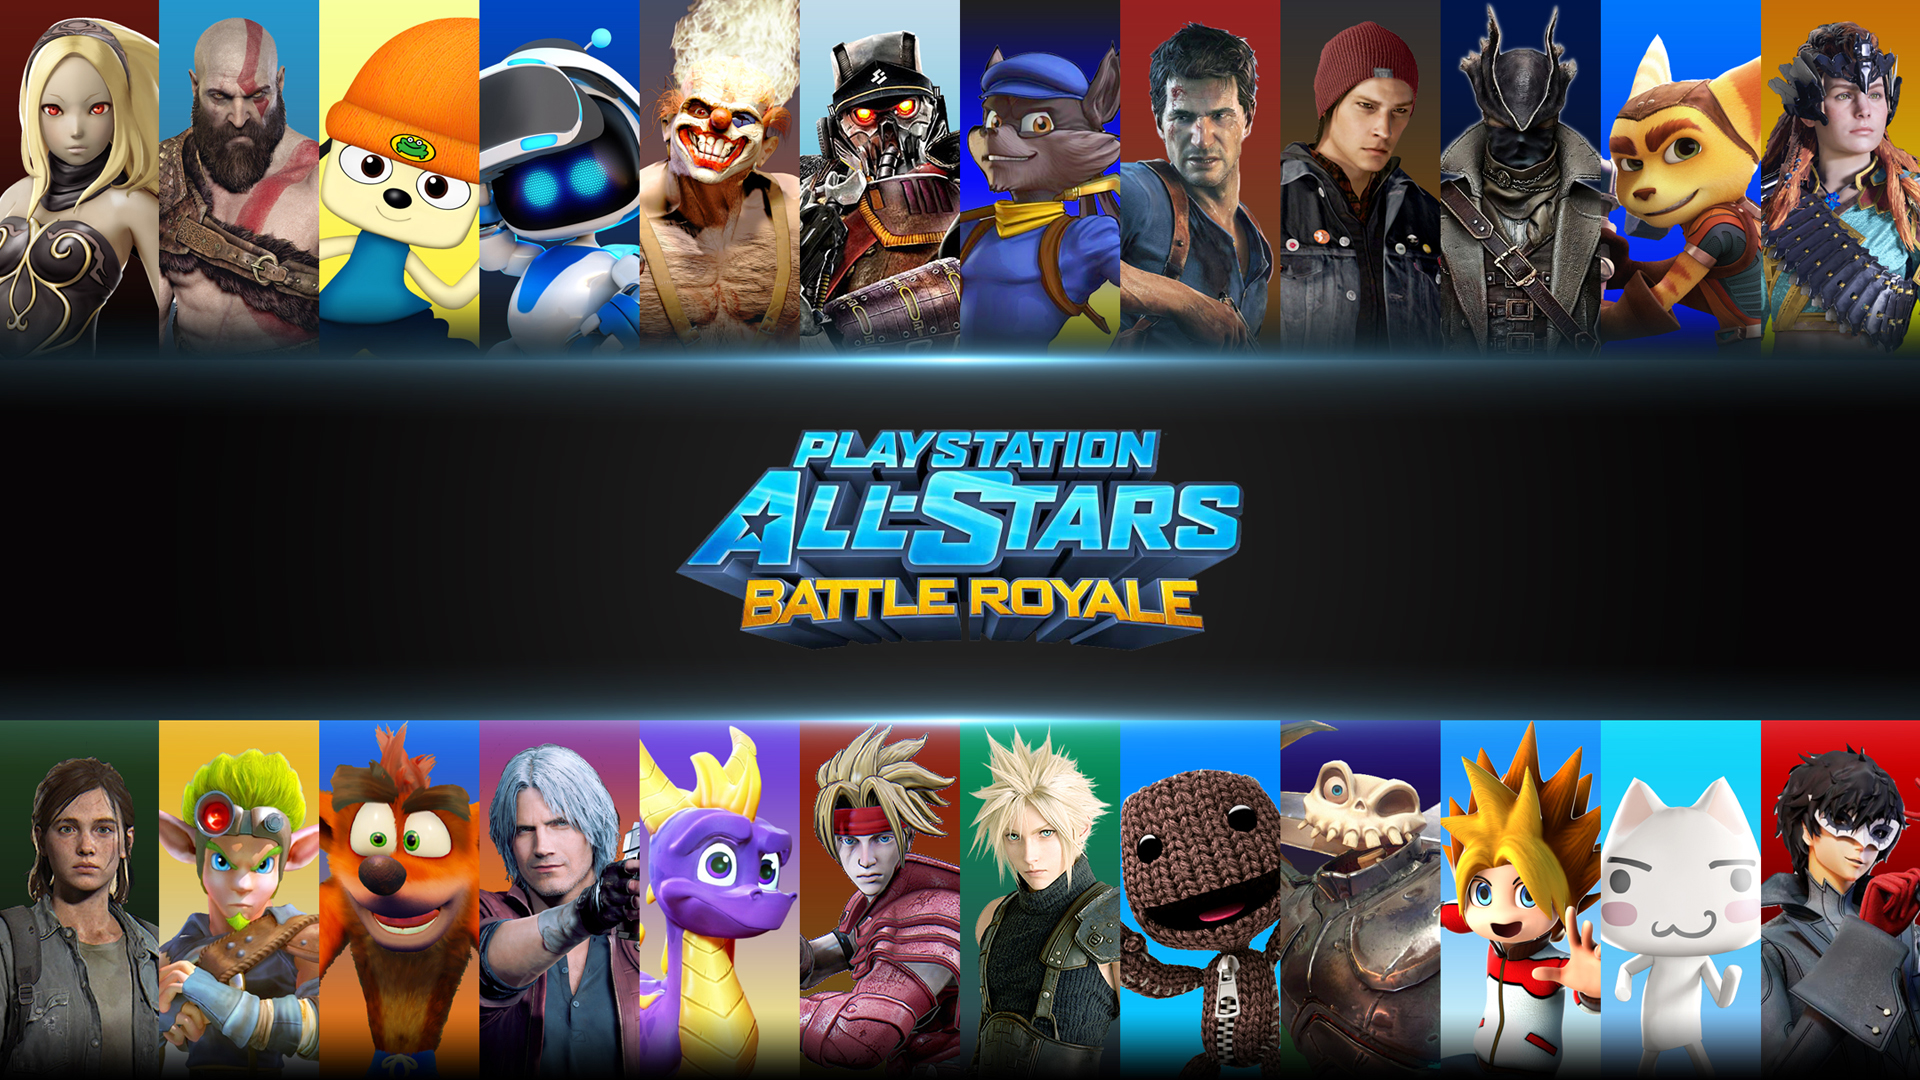 Brian Piyuka En Twitter: Playstation All Stars Wallpaper / Background (the 24 Characters Pays Homage To The Number Of Characters In The Original Game) #PlayStation #AllStarsRound2 #PlayStationAllStars2 #PlaystationAllStars YearsOfPlay #PS4 #PS5